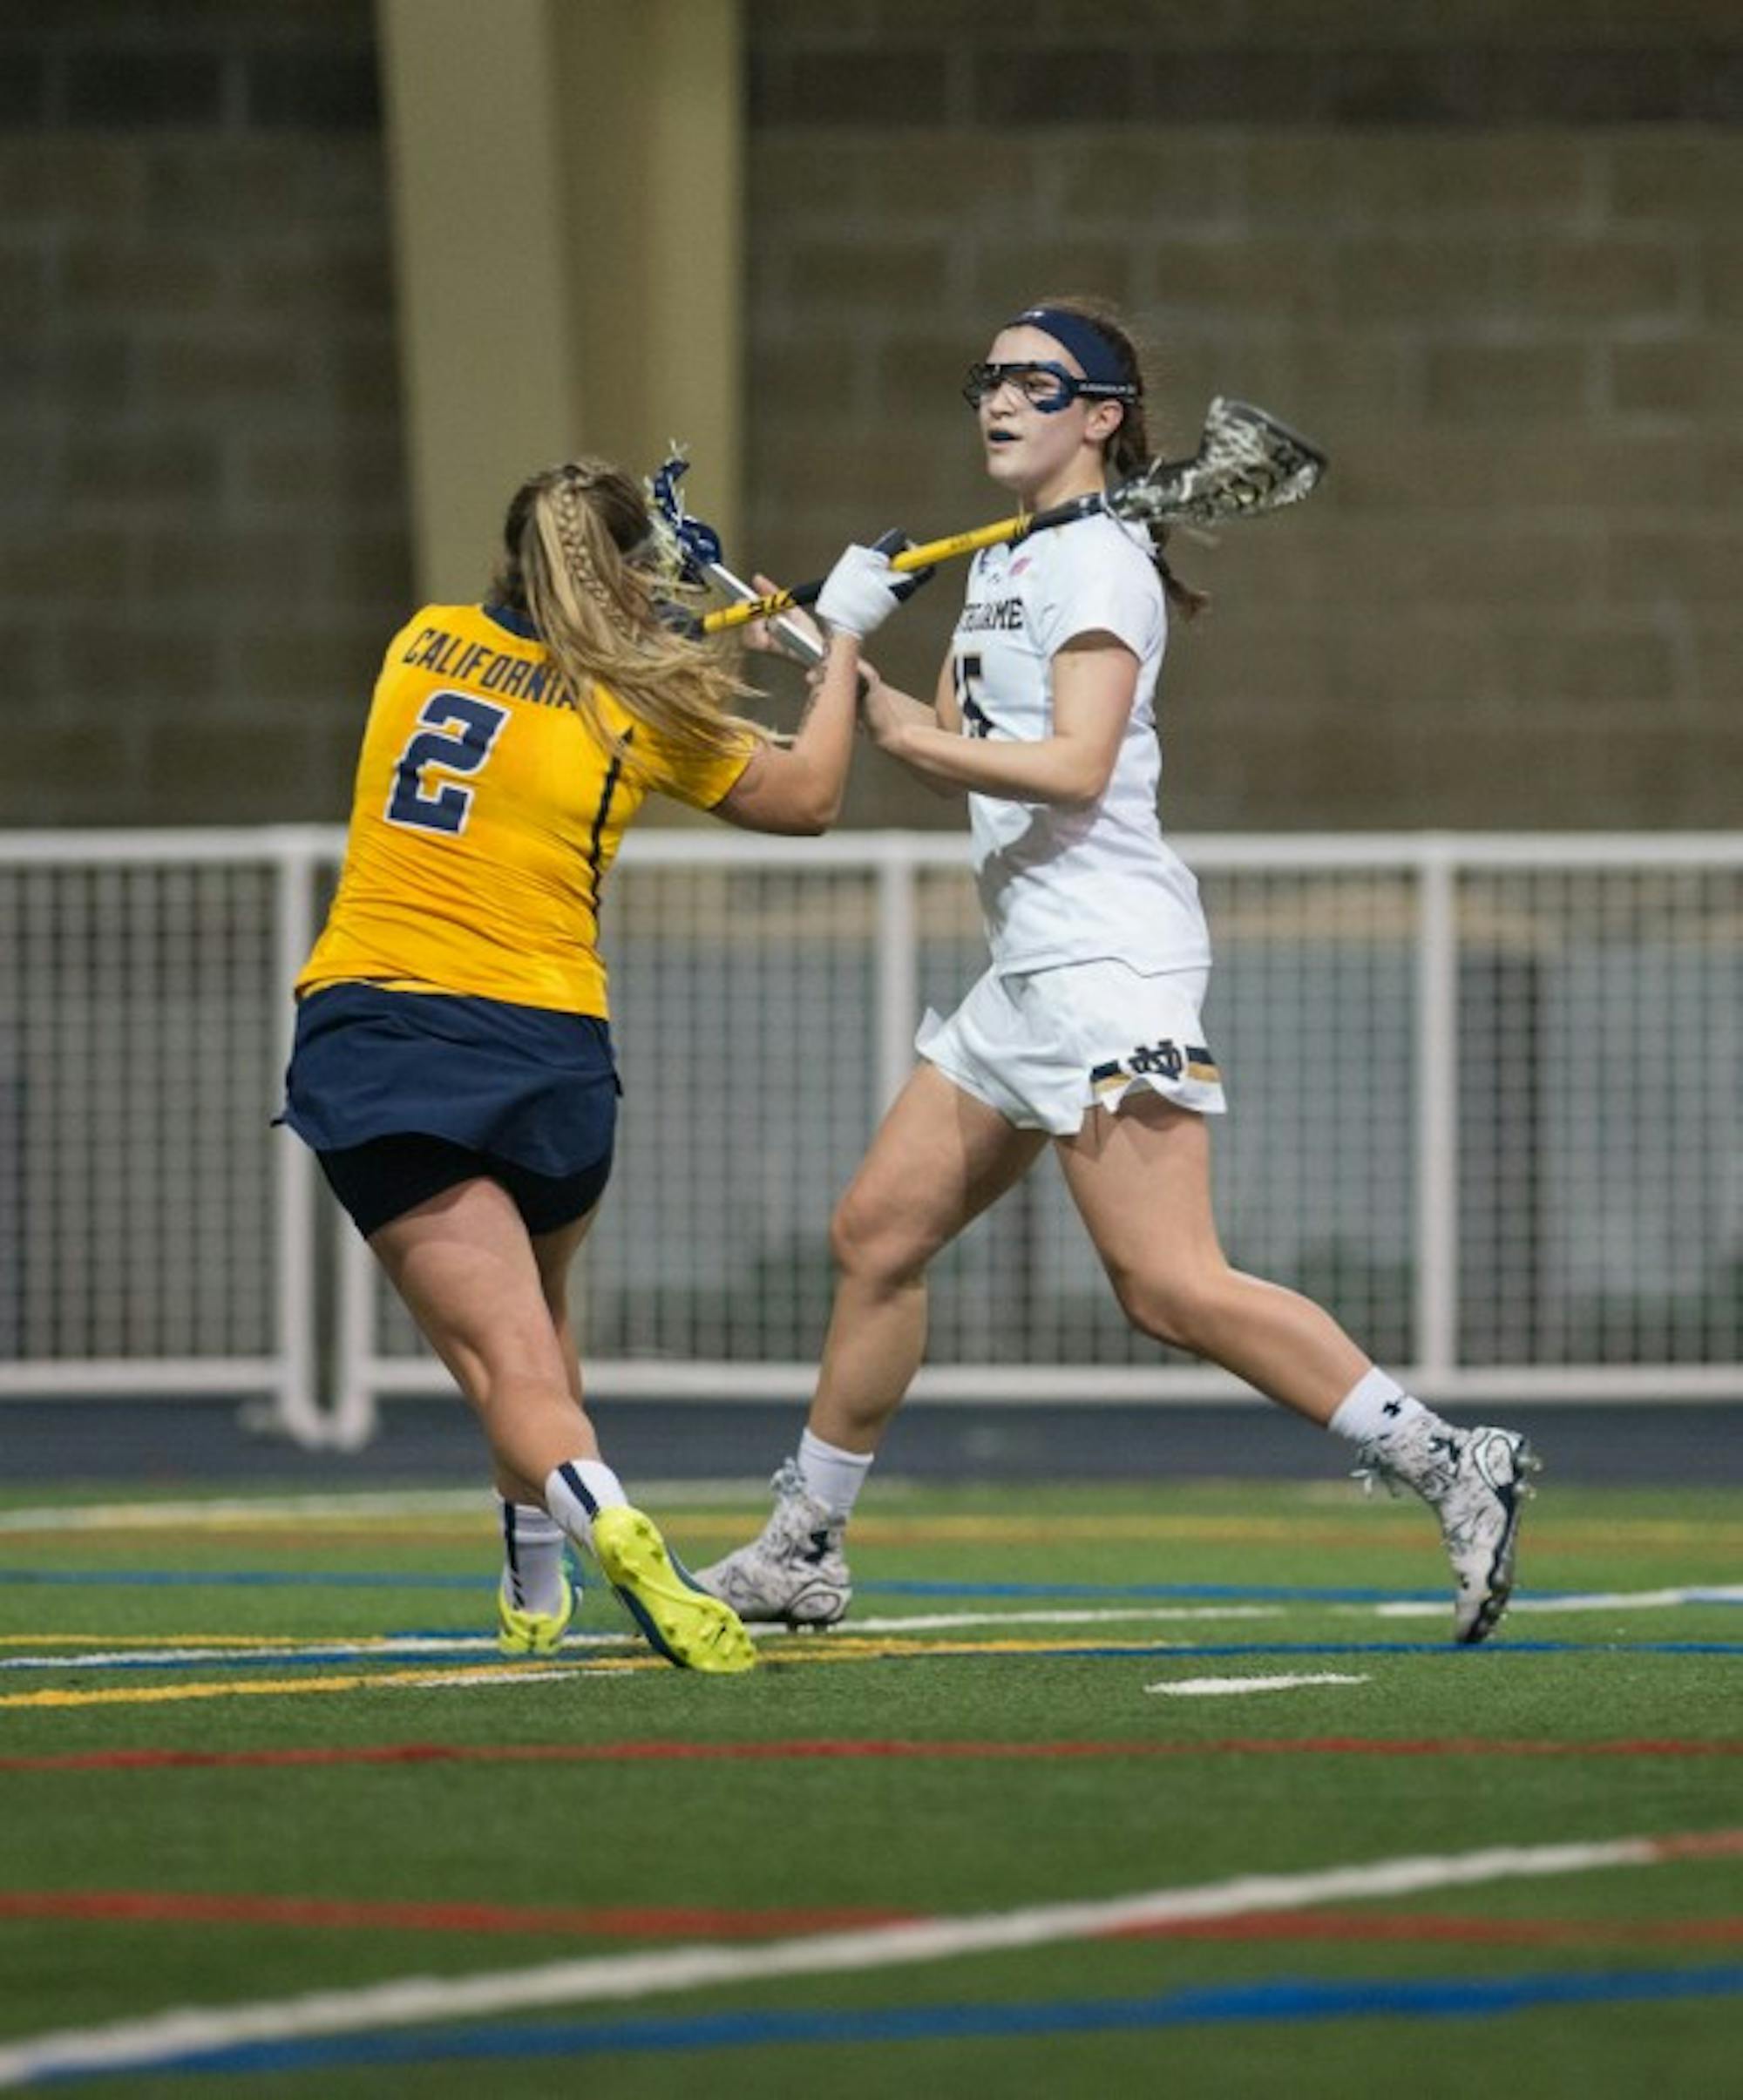 Junior attack Cortney Fortunato looks to make a pass during Notre Dame’s 21-2 victory over California at Loftus Sports Center on Feb. 28.